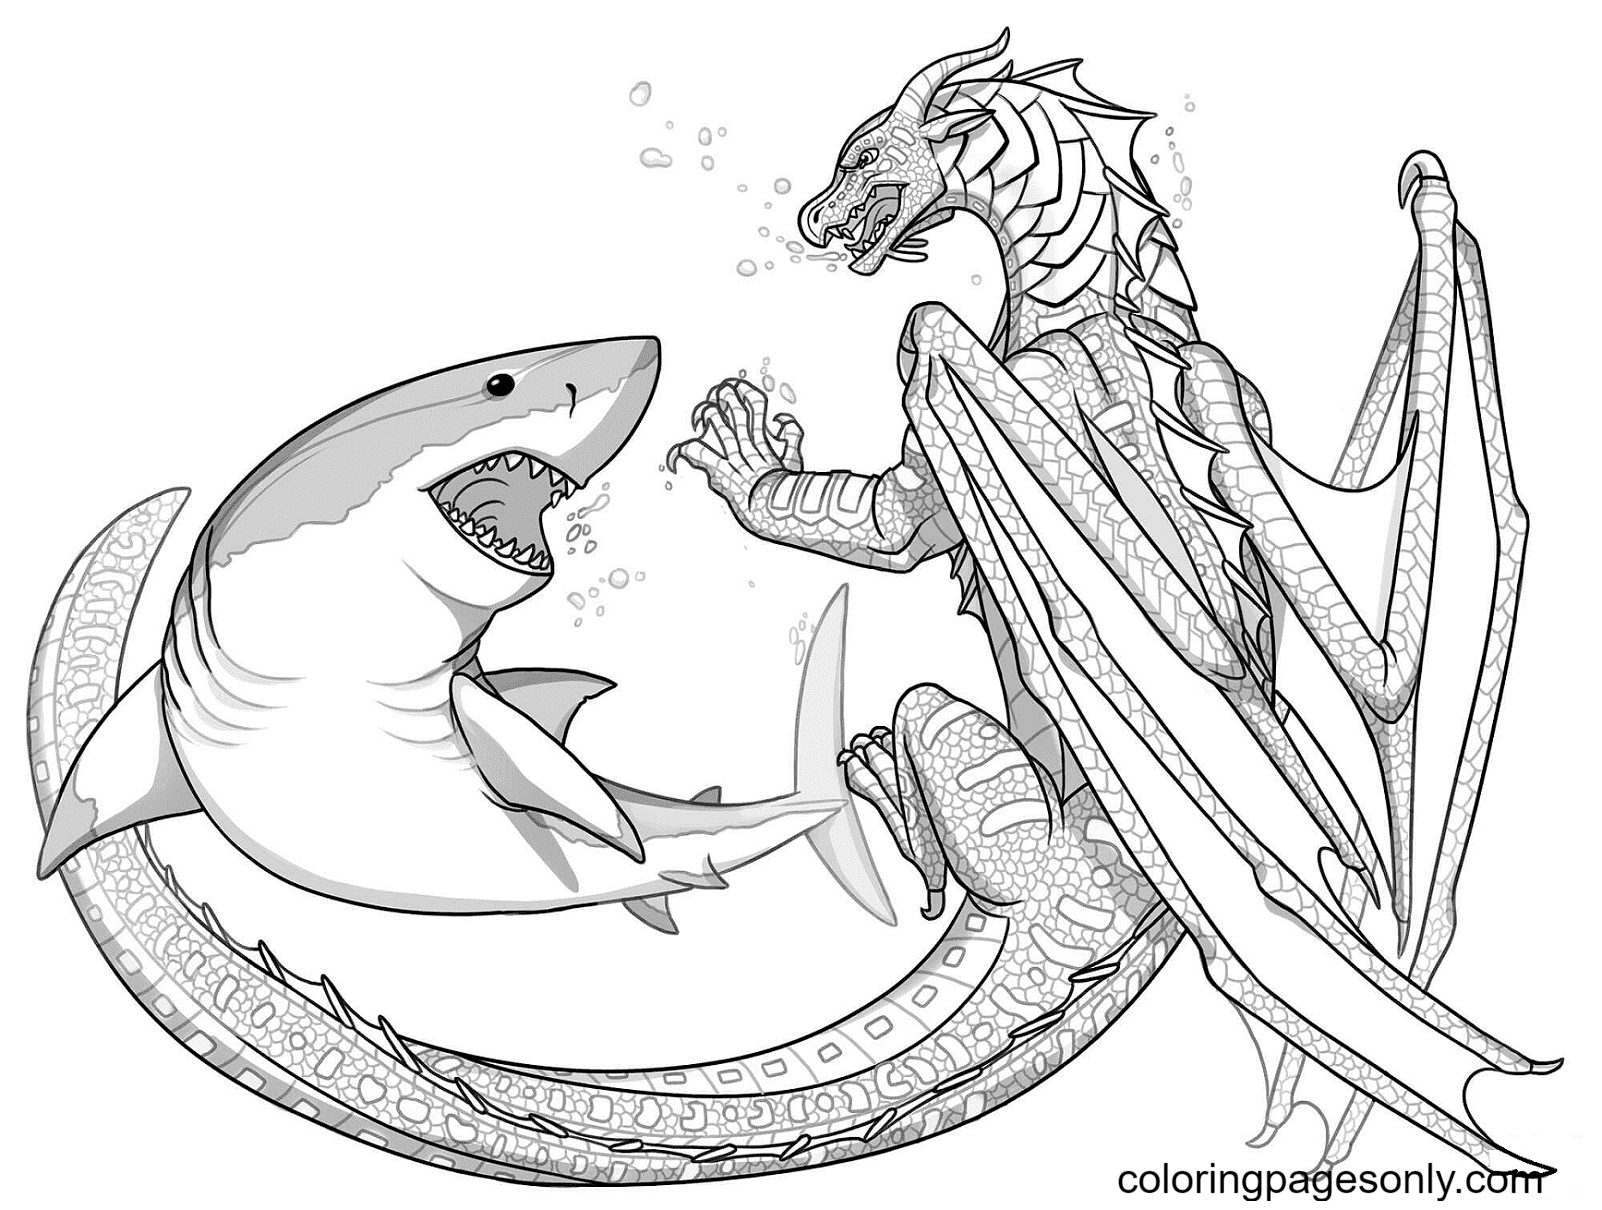 Seawing Dragon with Sharks Coloring Page